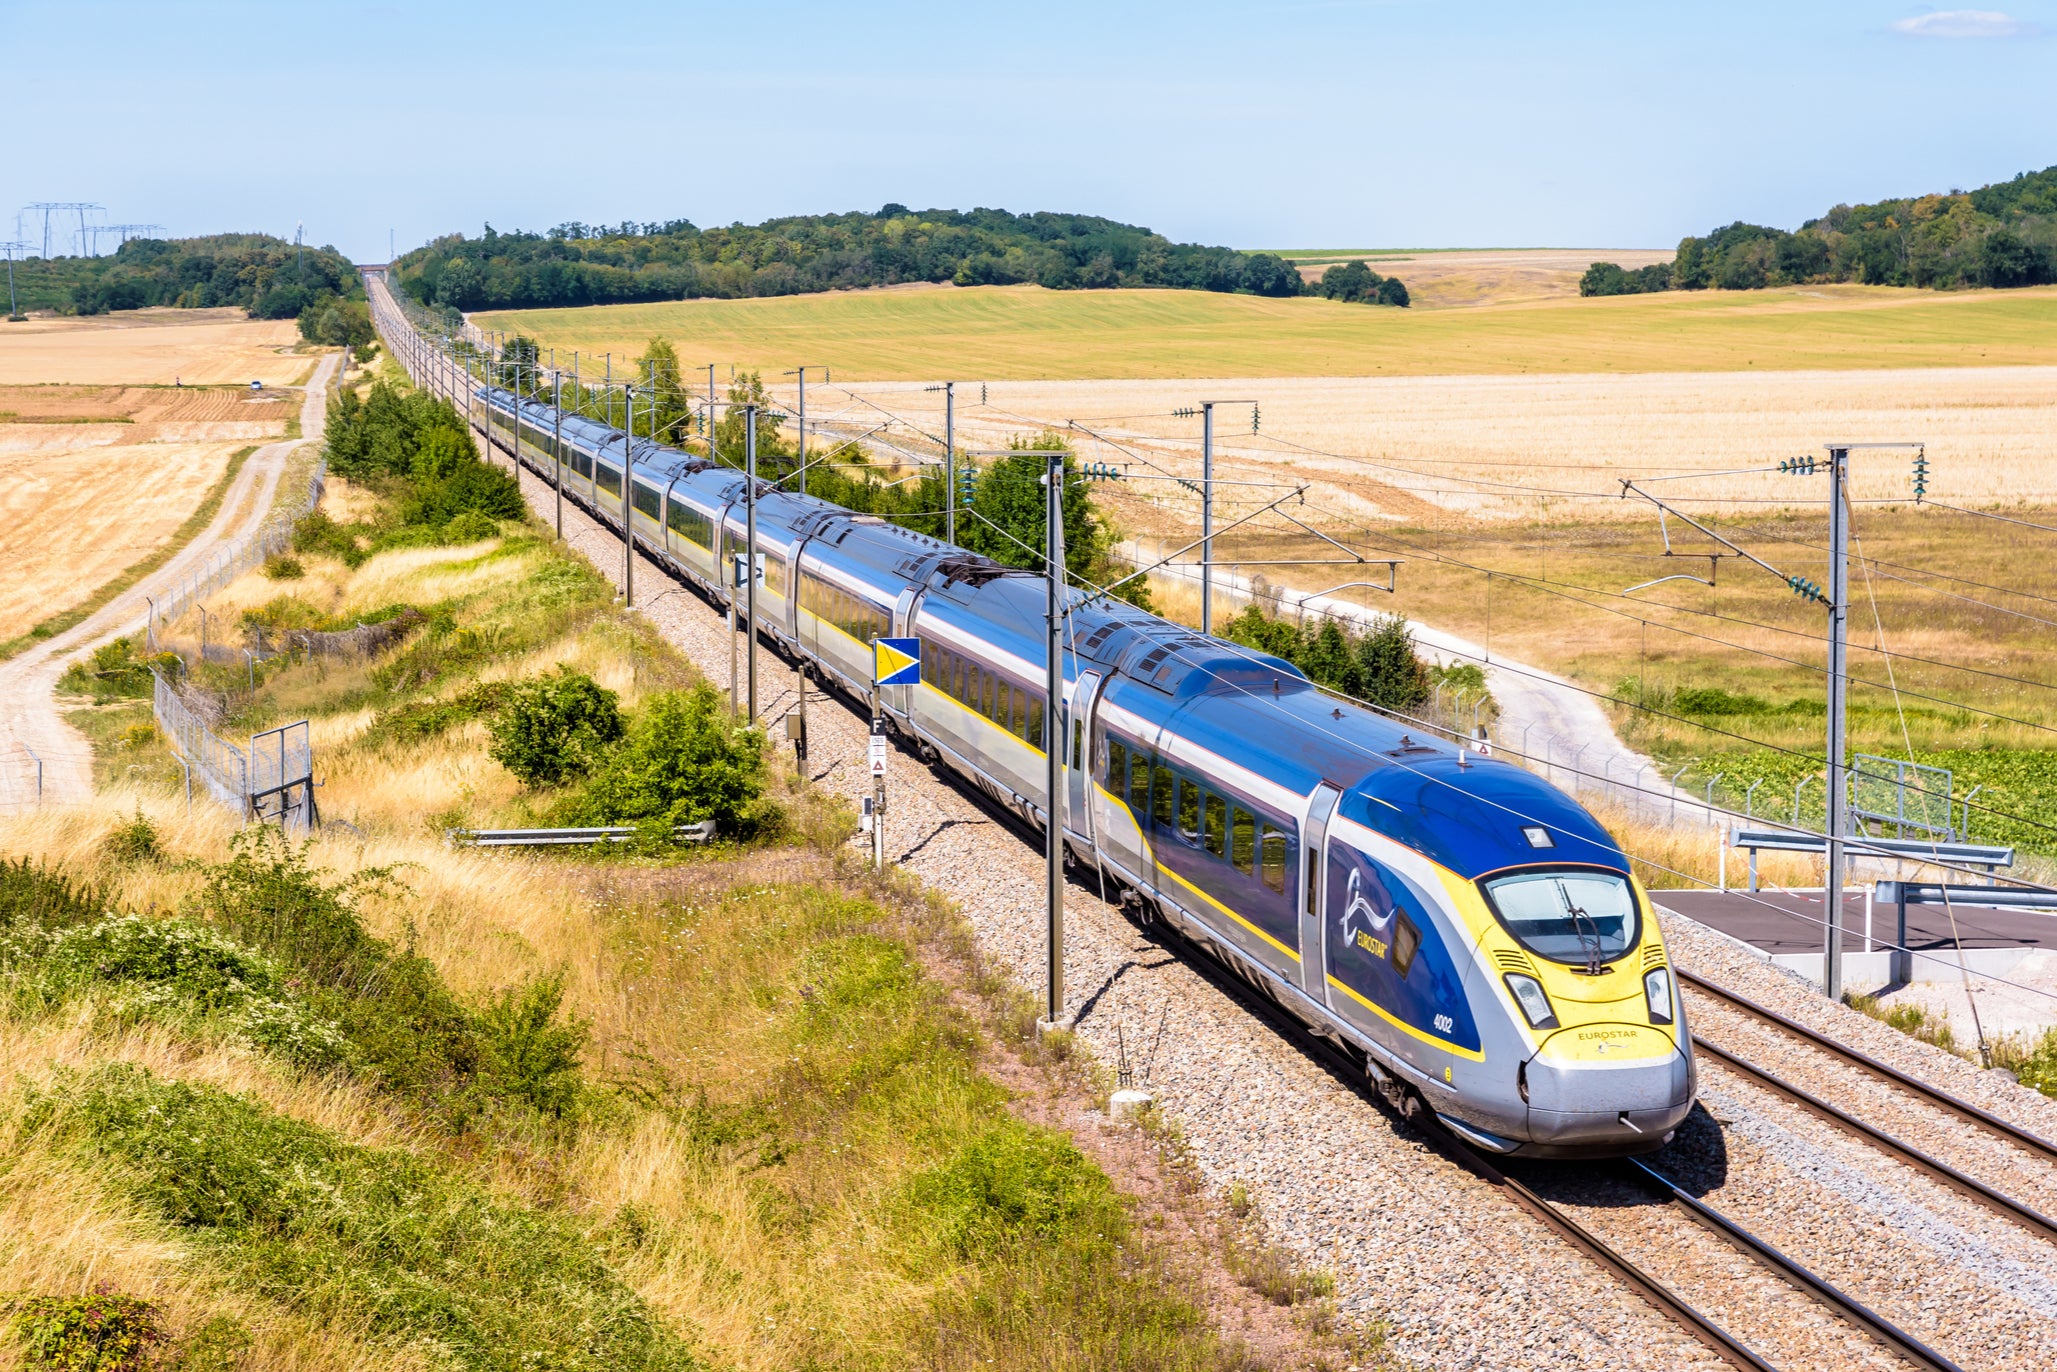 Eurostar’s merger with Thalys will mean better connections to European destinations